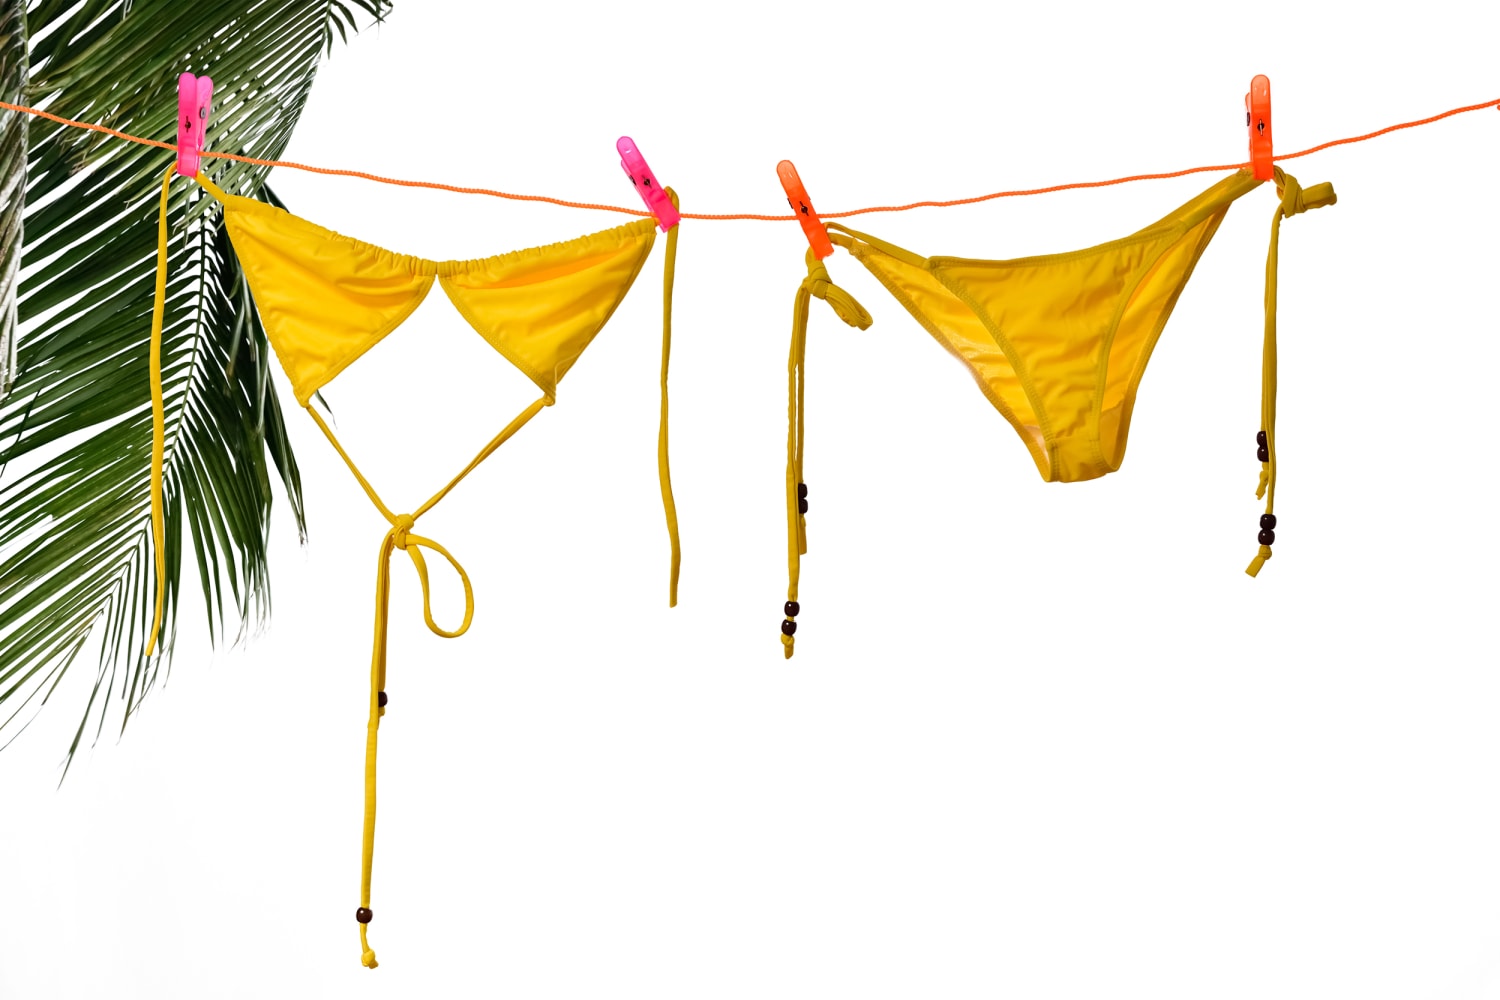 Caring for Bathing Suits: How to Wash Your Bathing Suit to Reduce